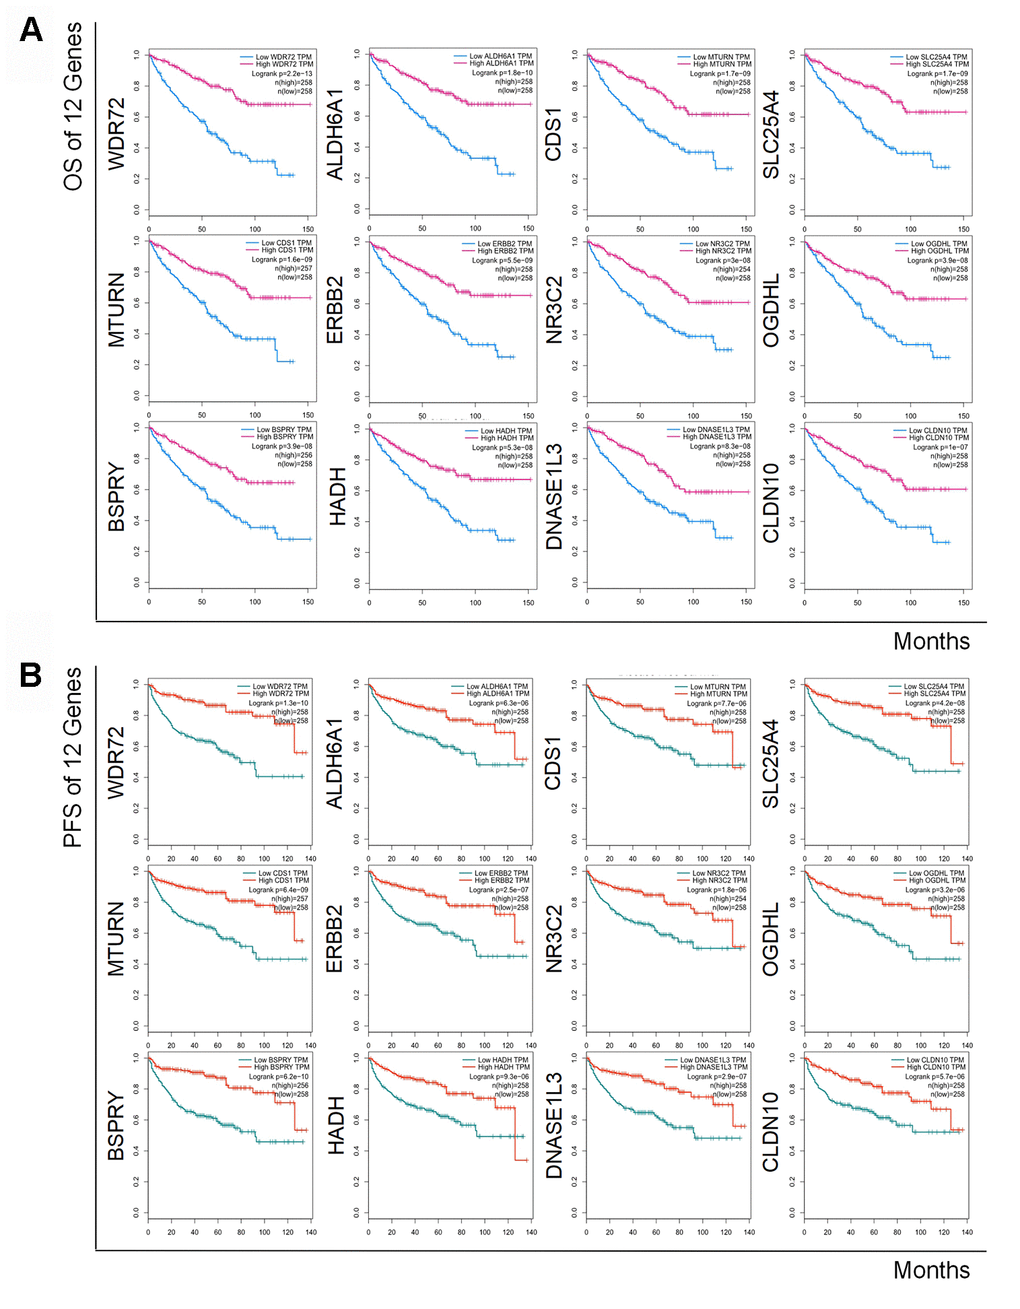 Kaplan-Meier curves of OS and DFS of 12 prognostic coding genes. Lower expression of all 12 coding genes was relevant to both unfavorable OS (A) and worse DFS (B) in patients with RCC.